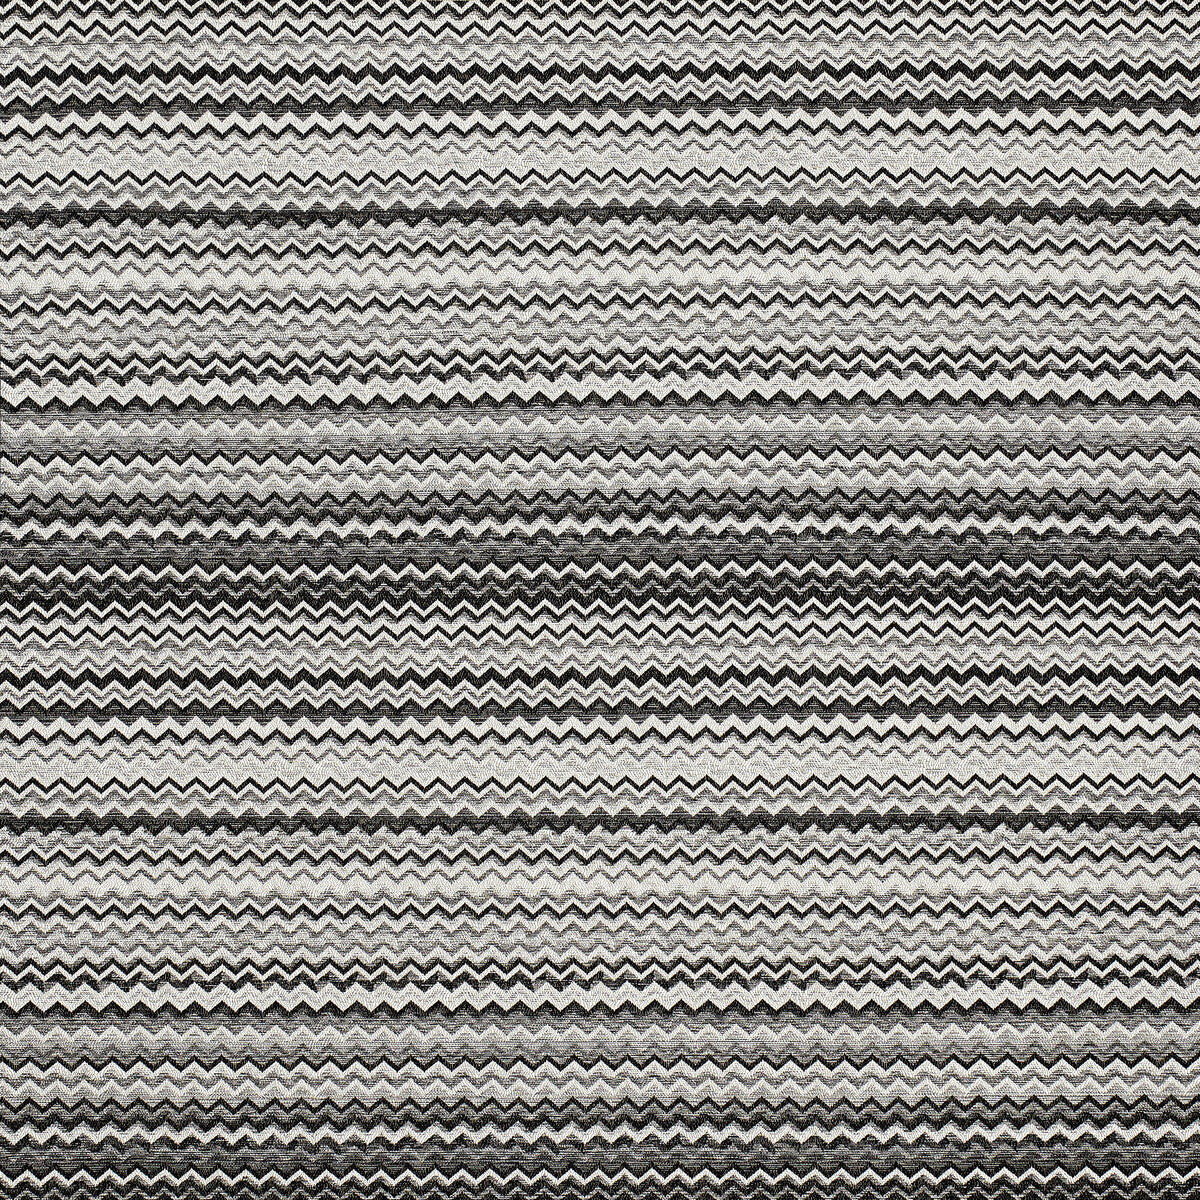 Wipptal fabric in 601 color - pattern 36227.811.0 - by Kravet Couture in the Missoni Home collection